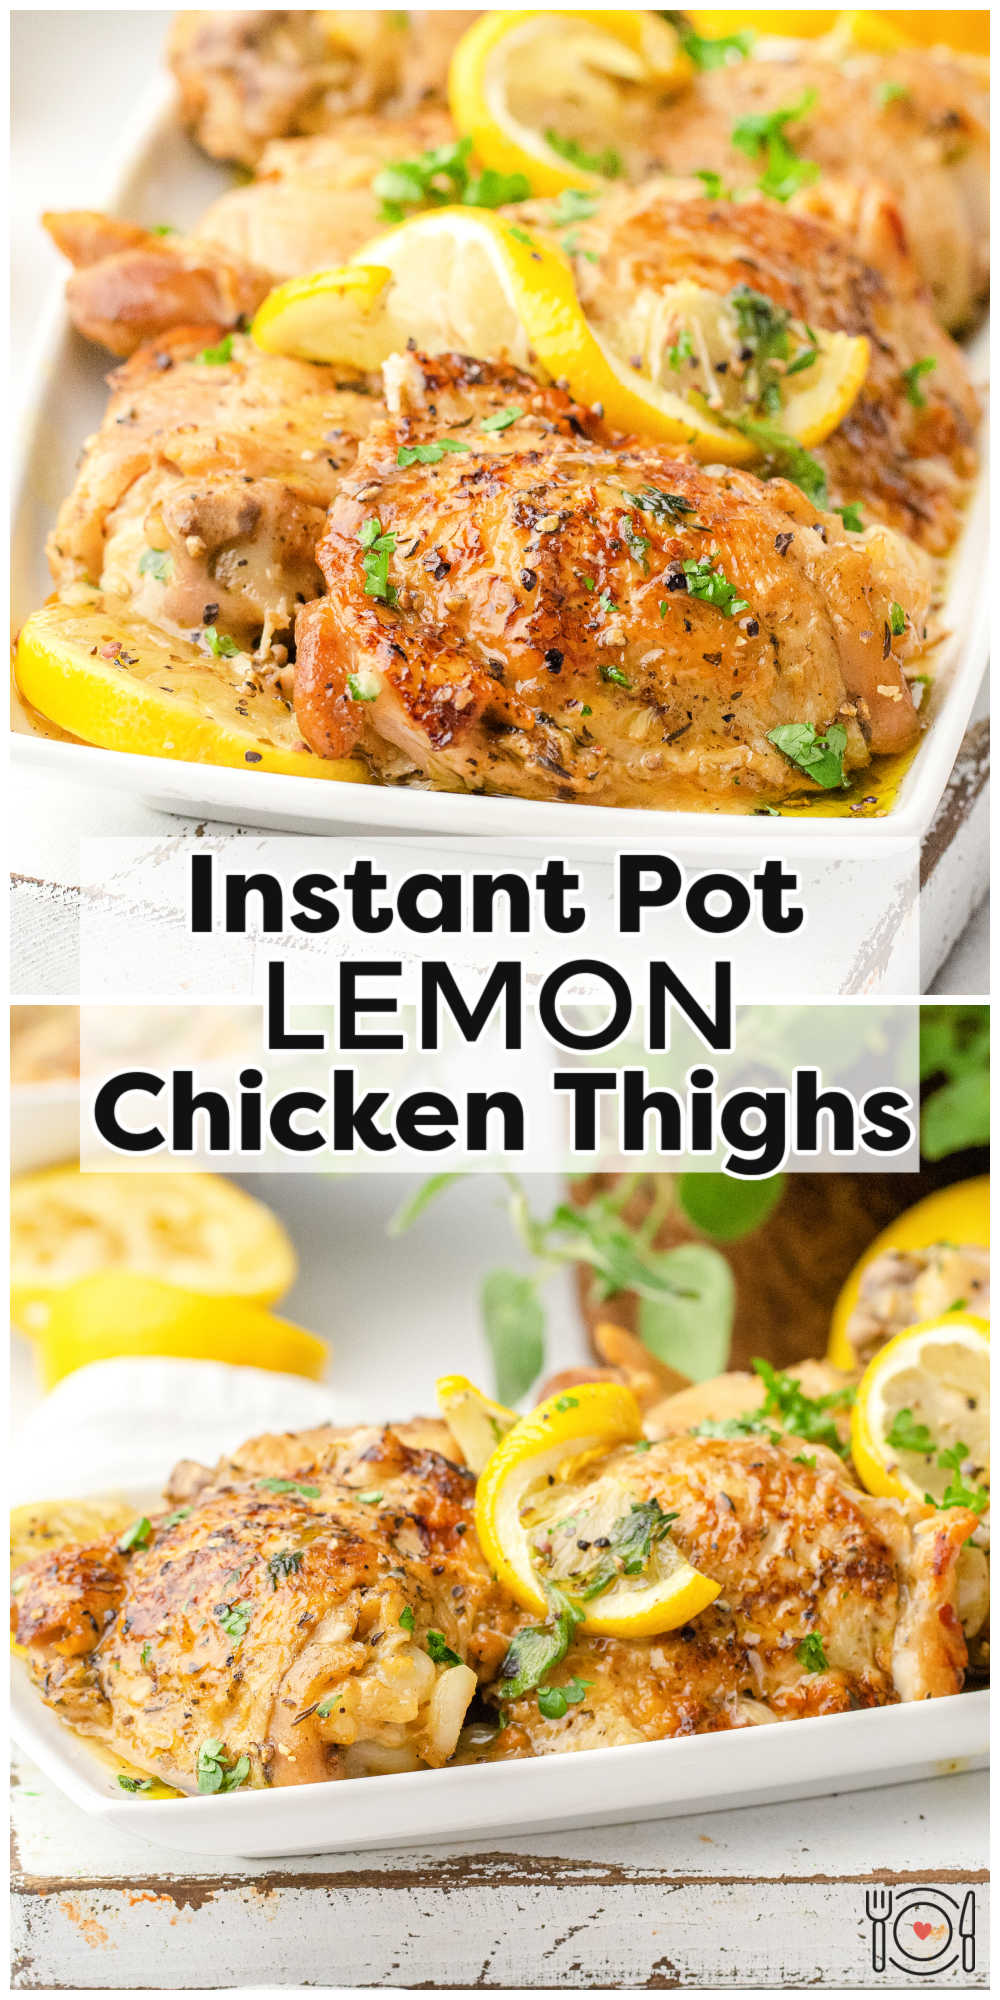 This Instant Pot Lemon Chicken Thighs recipe is a great economical chicken thighs recipe ideal for weeknights. via @foodfolksandfun